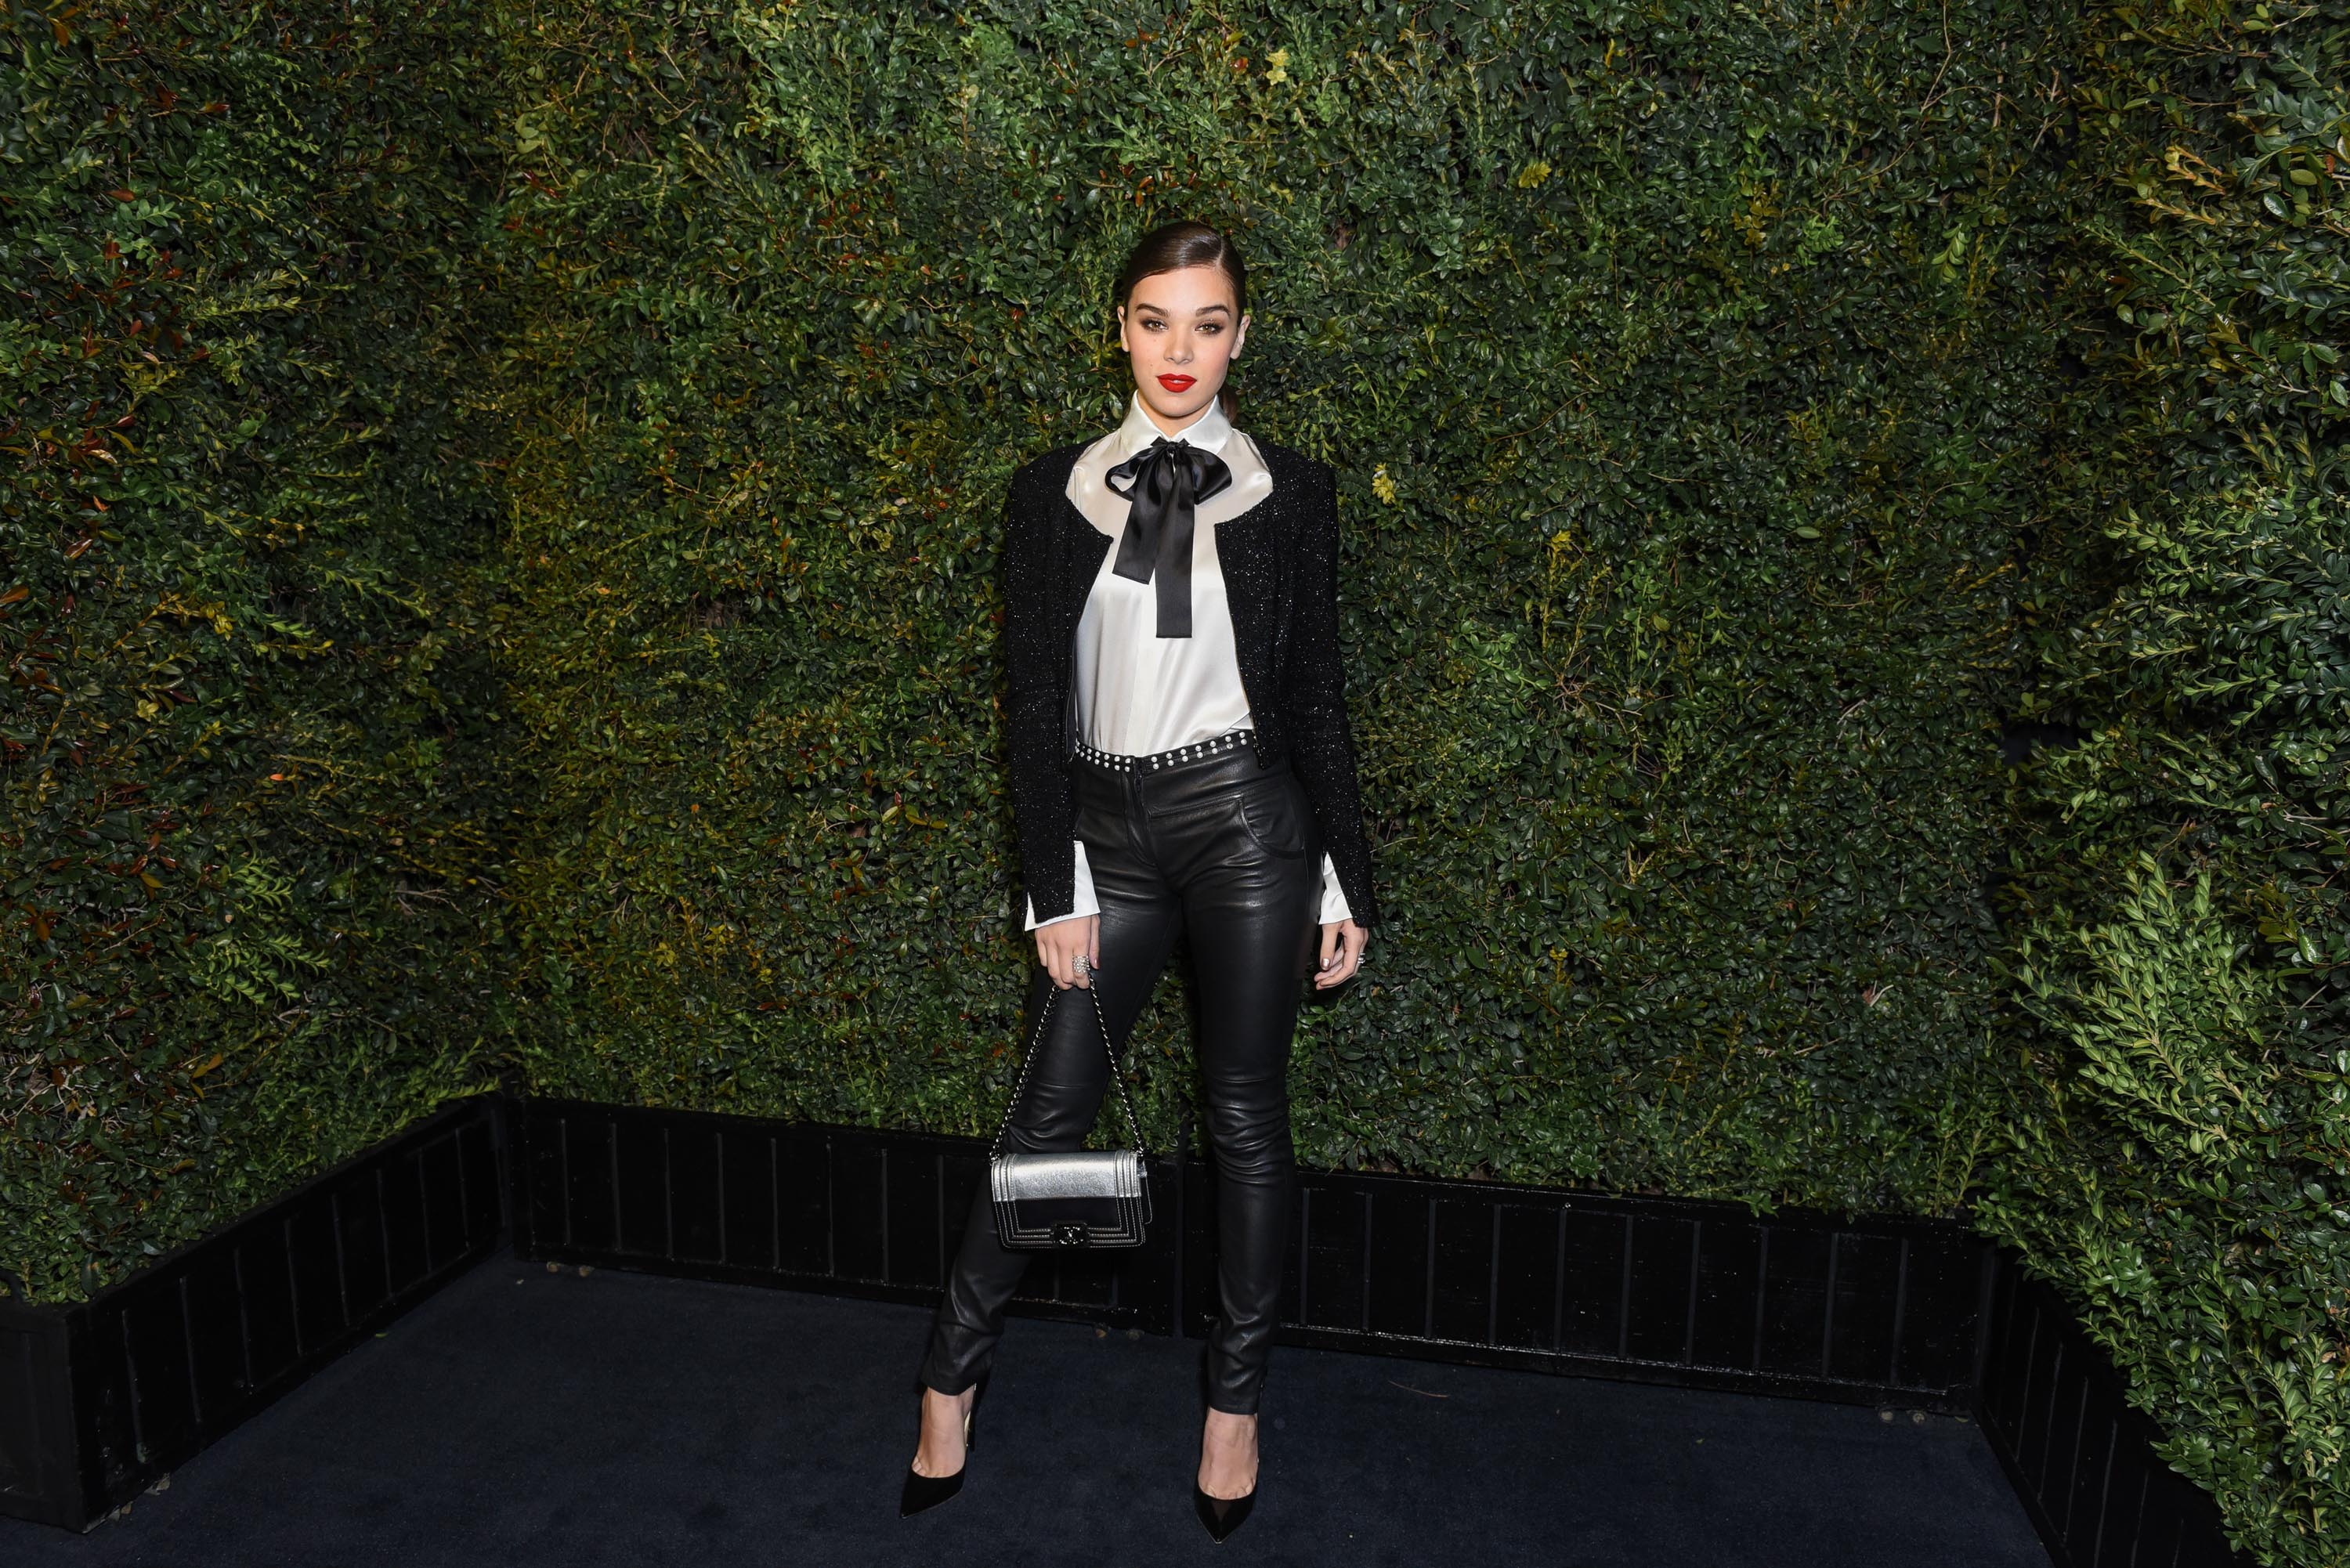 Hailee Steinfeld attends the Charles Finch and CHANEL Pre-Oscar Awards Dinner